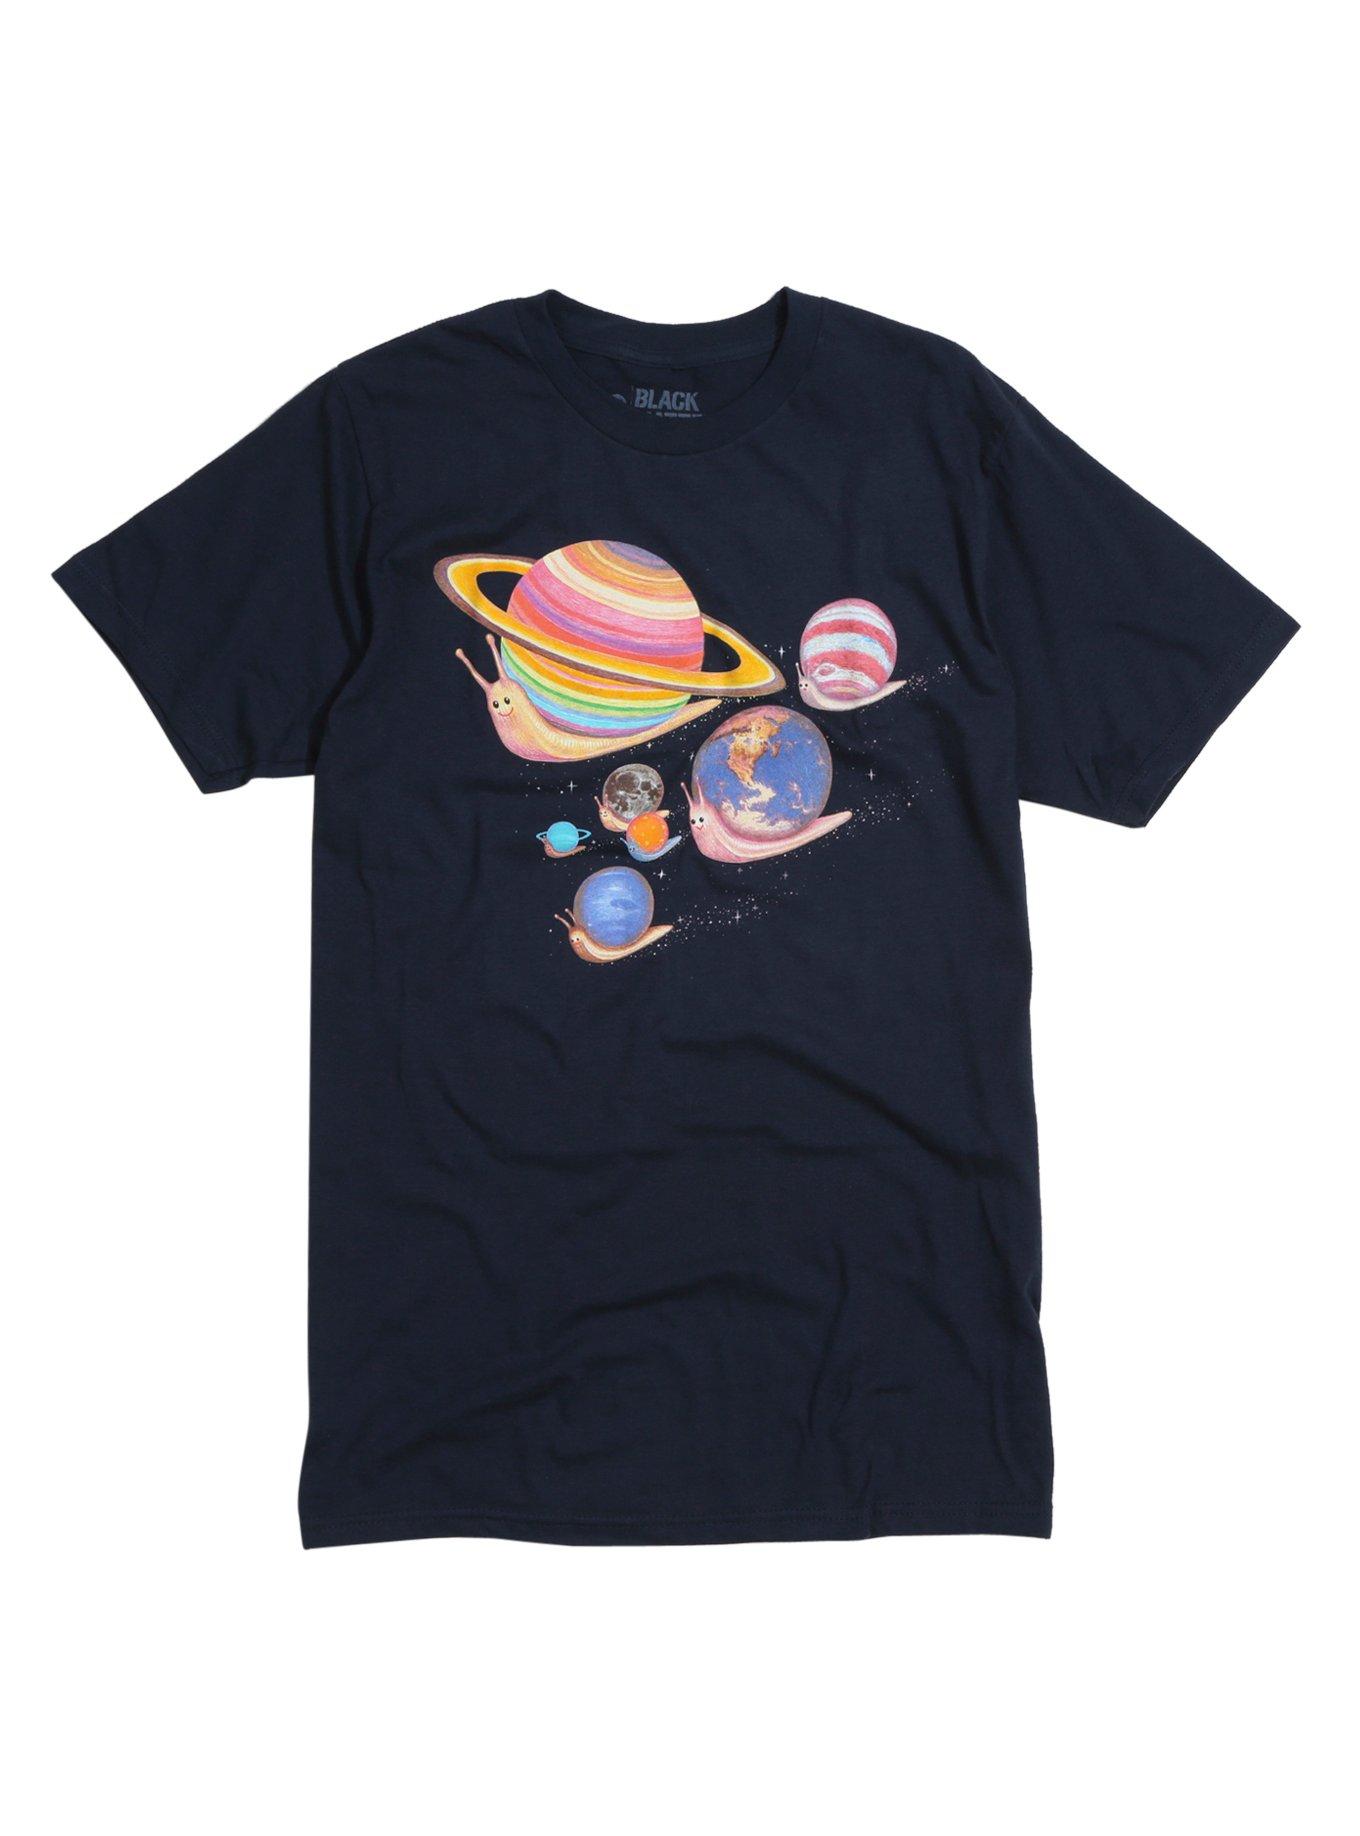 Snail Space T-Shirt | Hot Topic